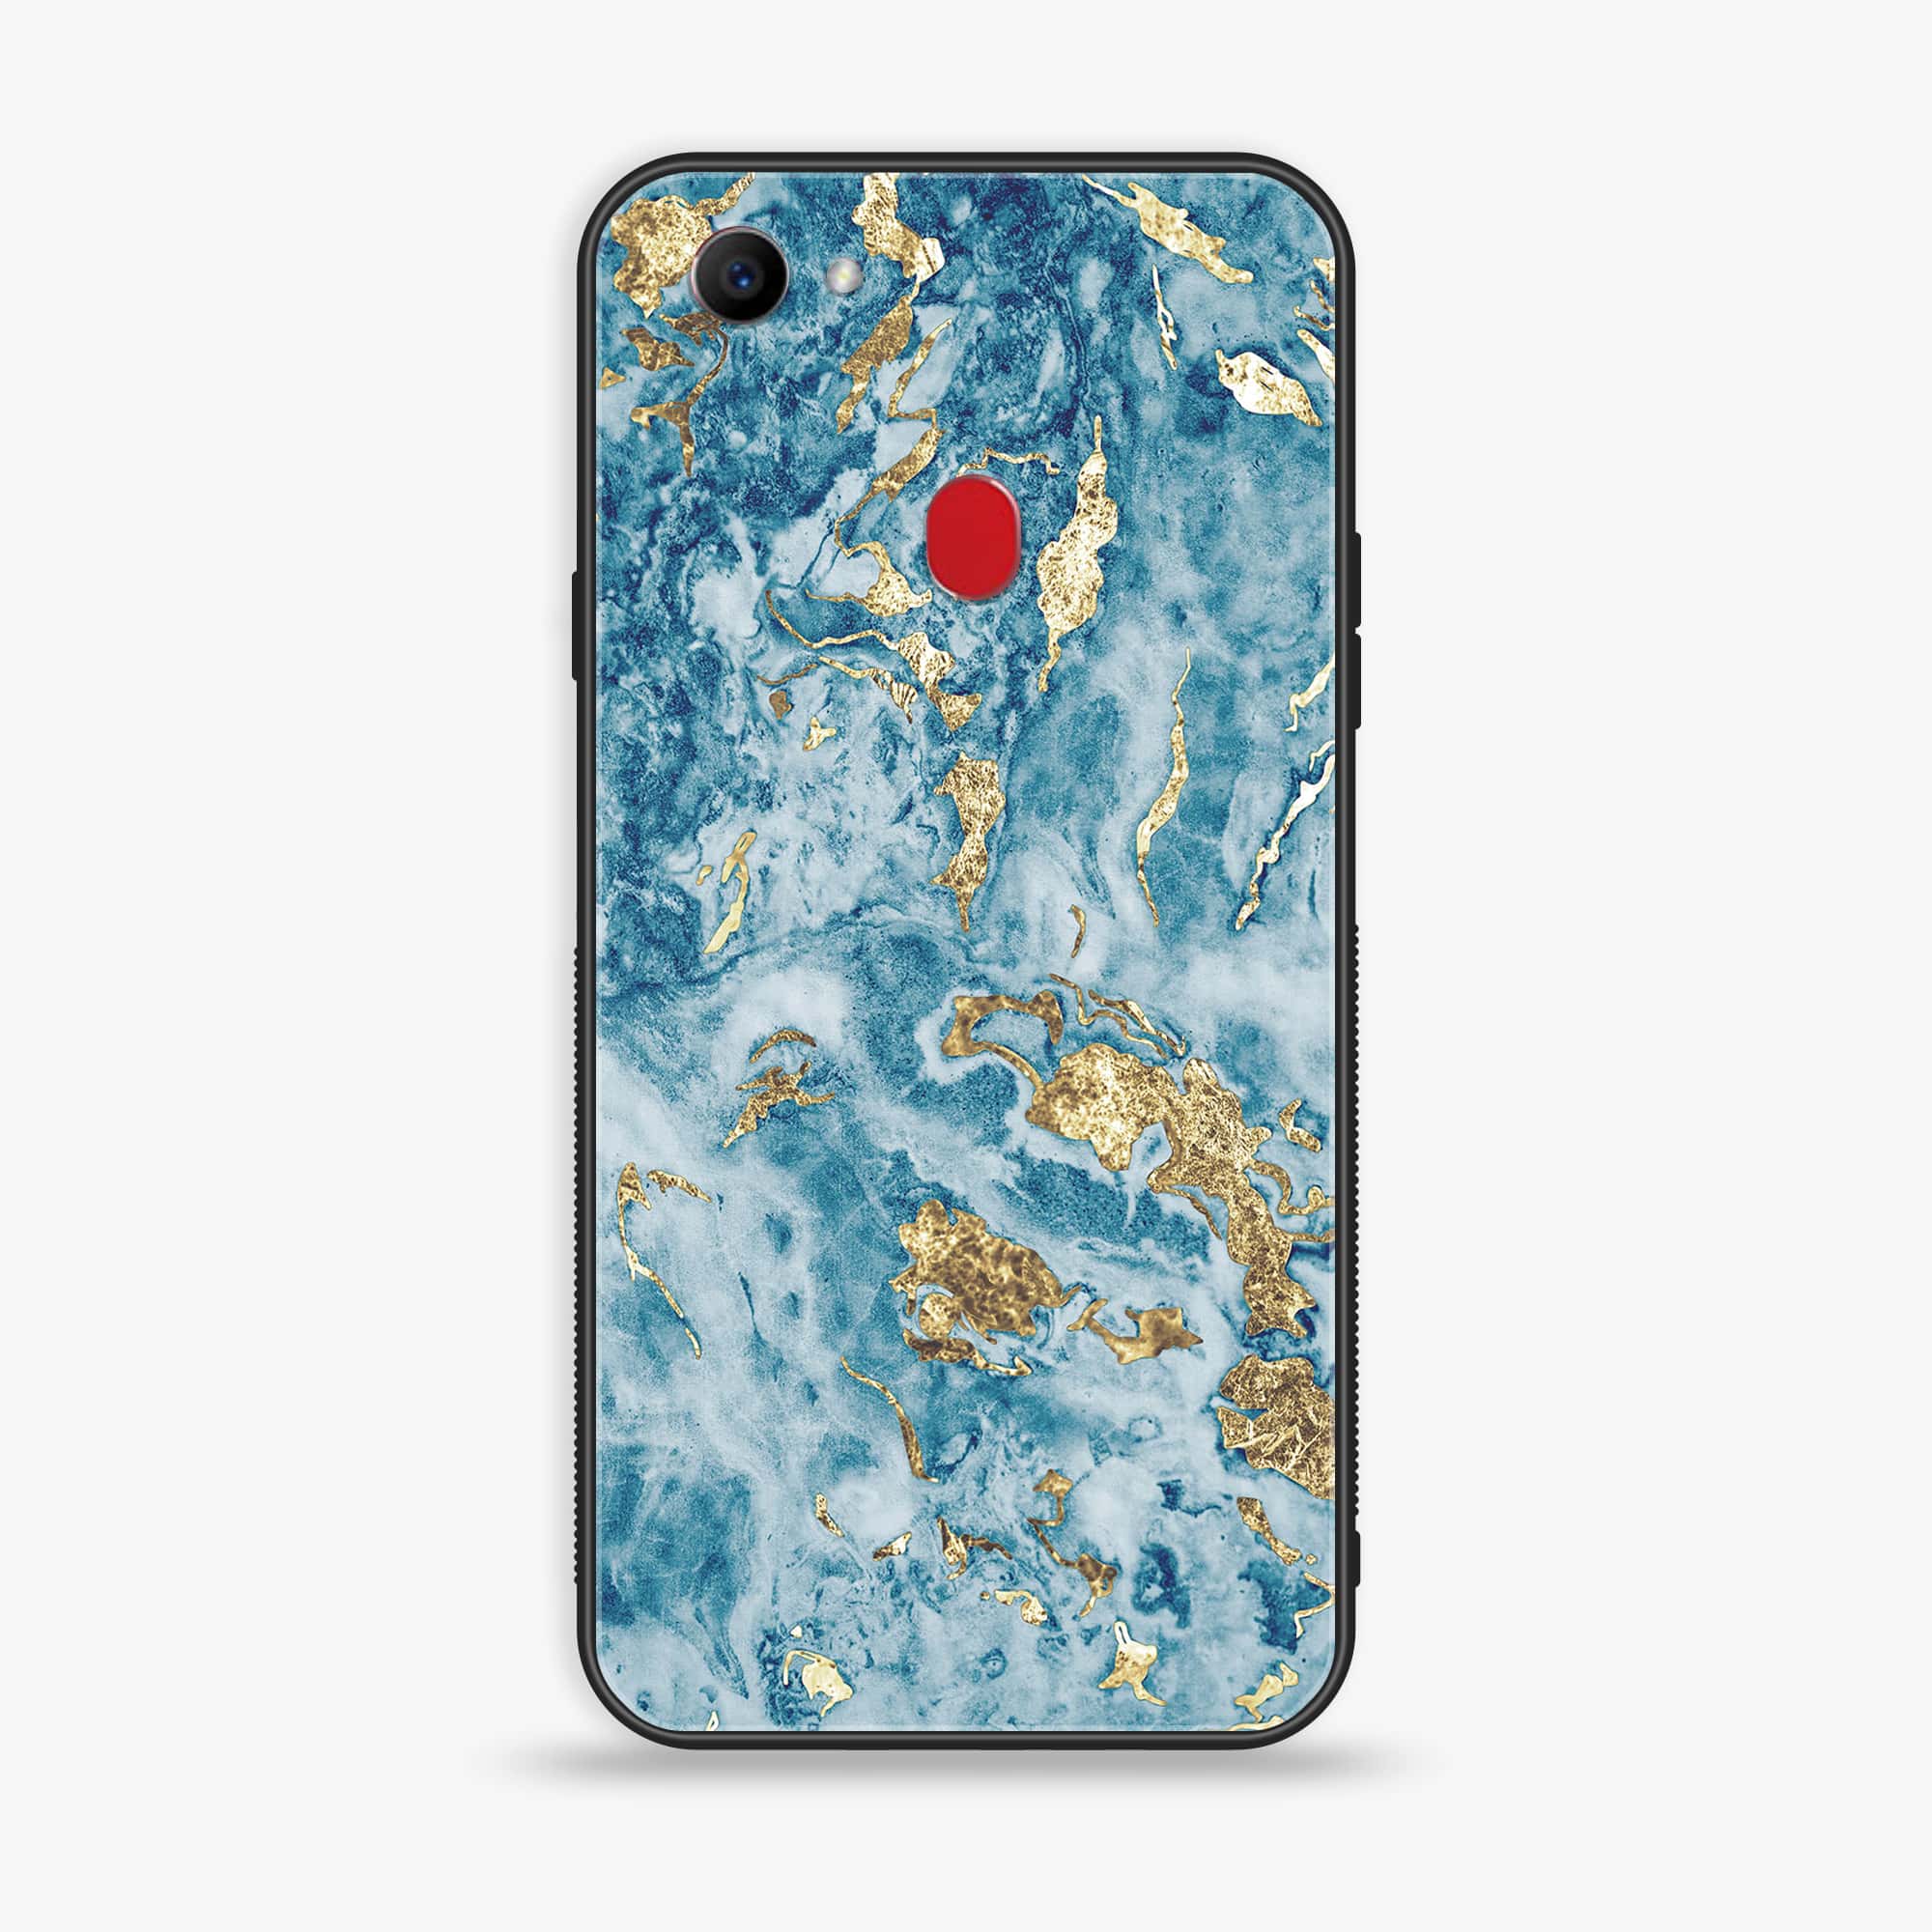 Oppo F7 - Blue Marble 2.0 Series - Premium Printed Glass soft Bumper shock Proof Case